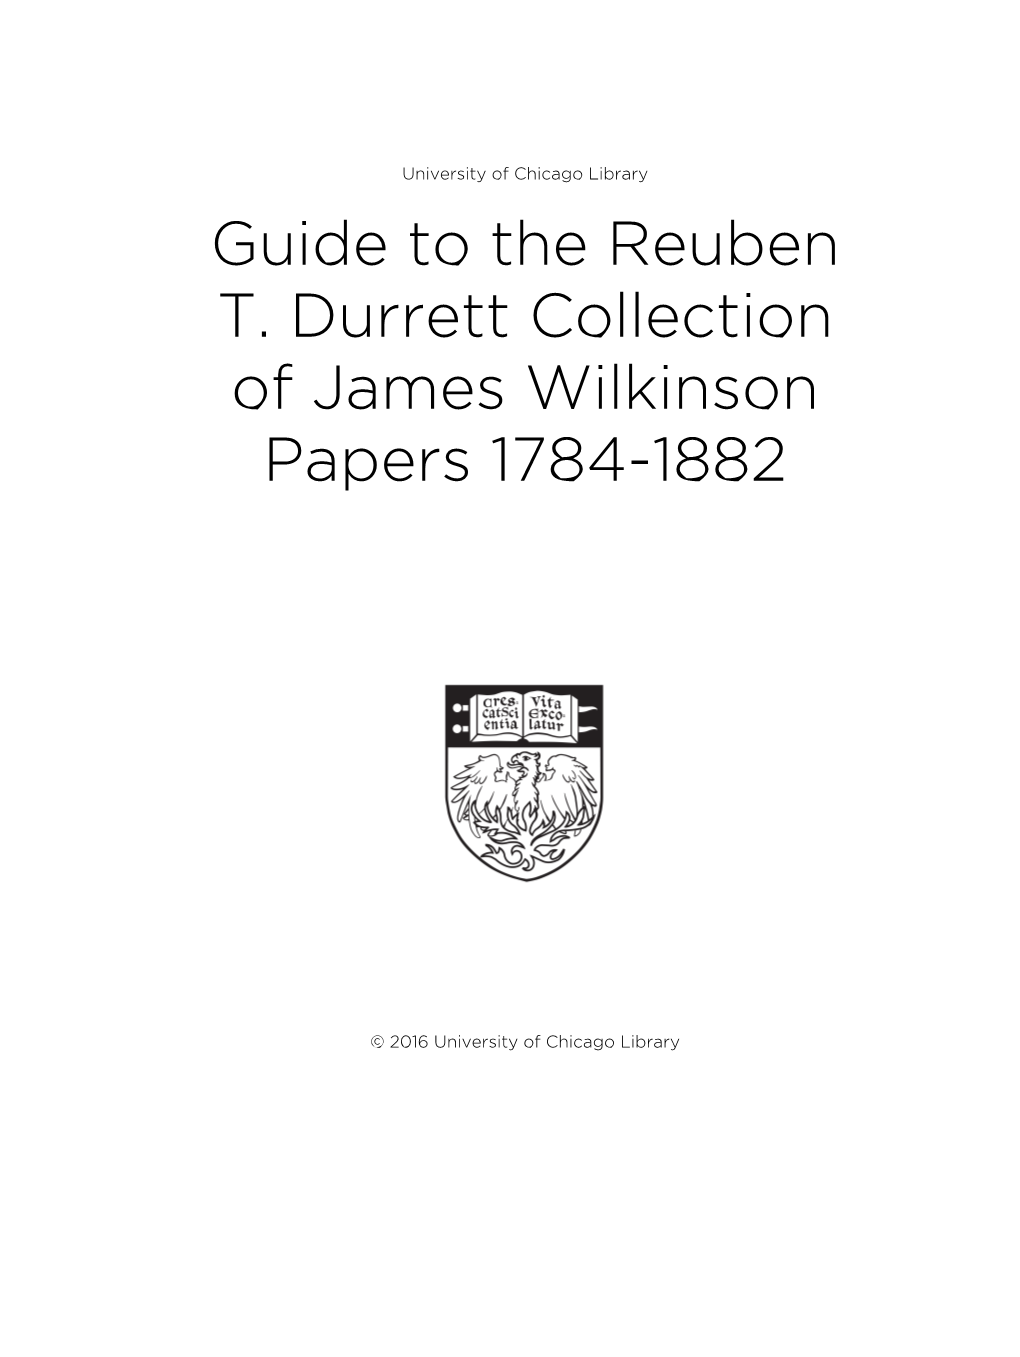 Guide to the Reuben T. Durrett Collection of James Wilkinson Papers 1784-1882